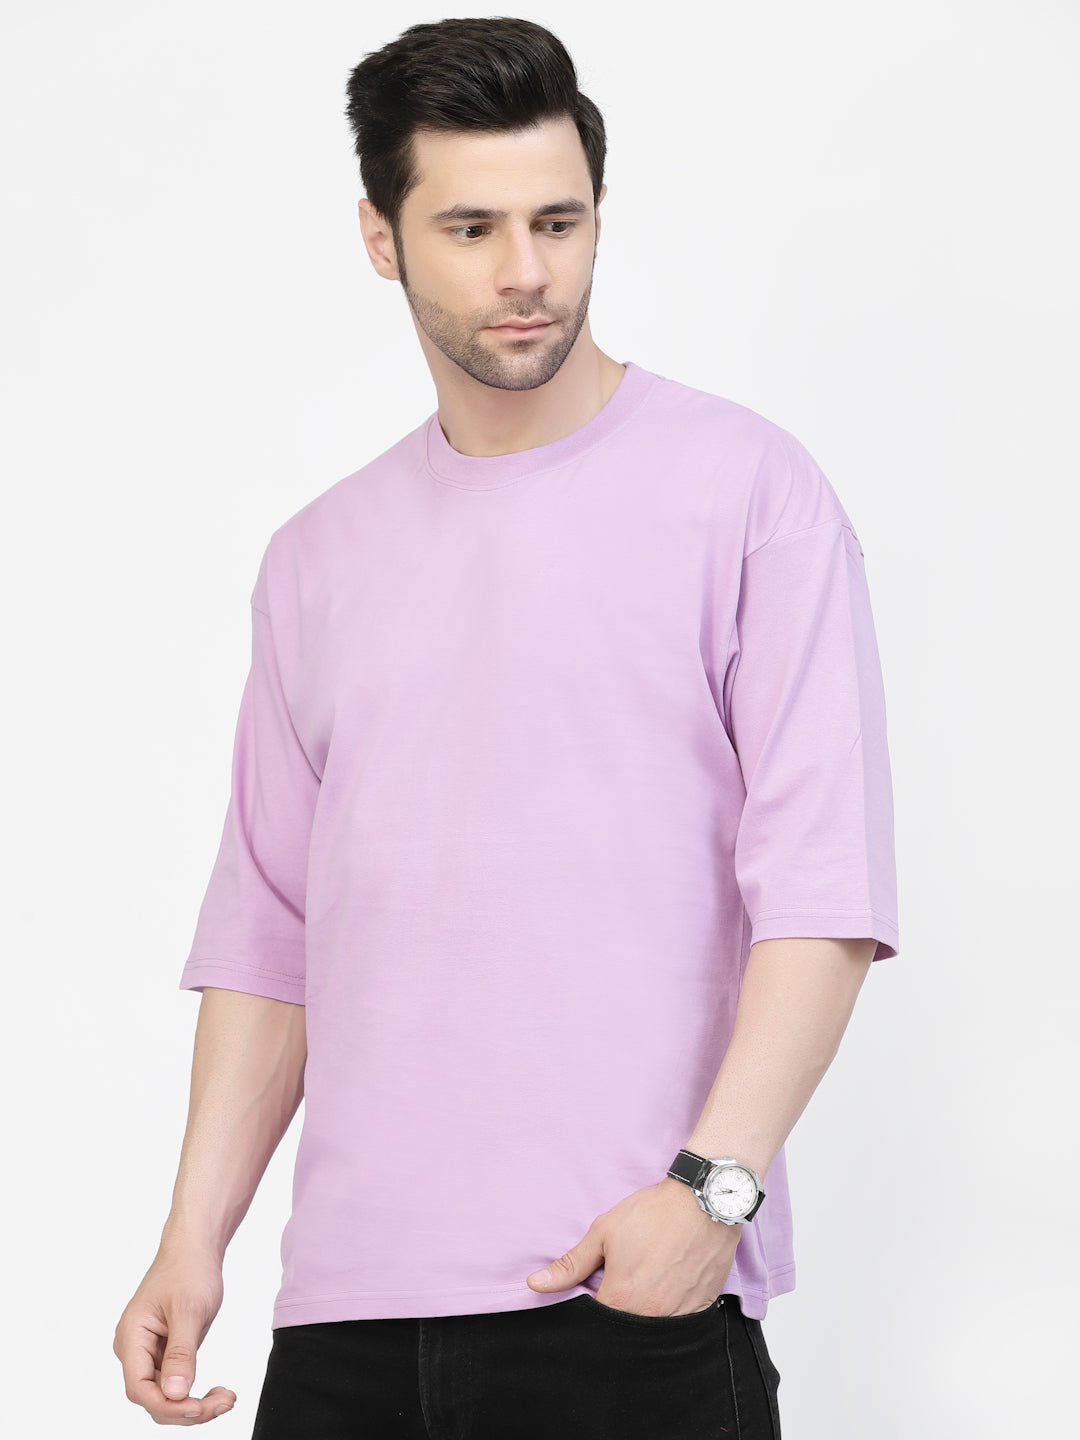 Lavender Plain Cotton Oversized Tee by Gavin Pairs